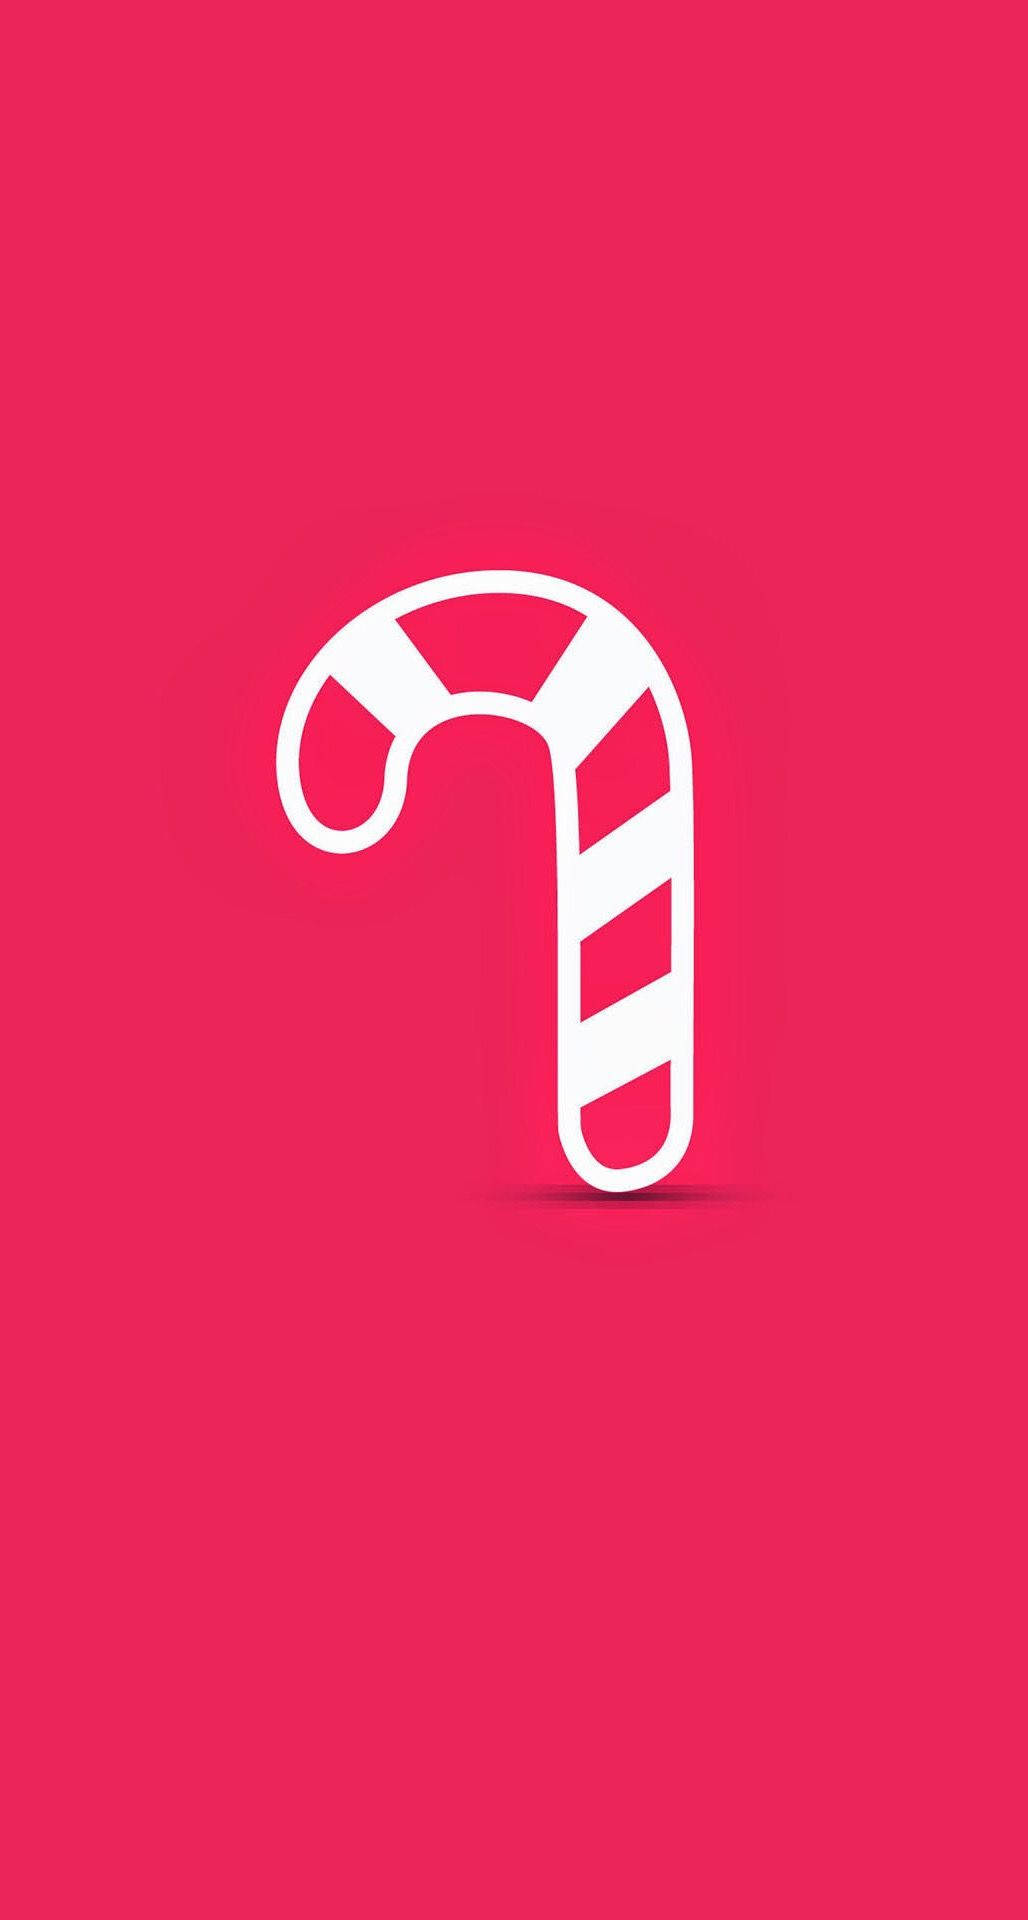 Tiny Candy Cane In Fuchsia Pink Background